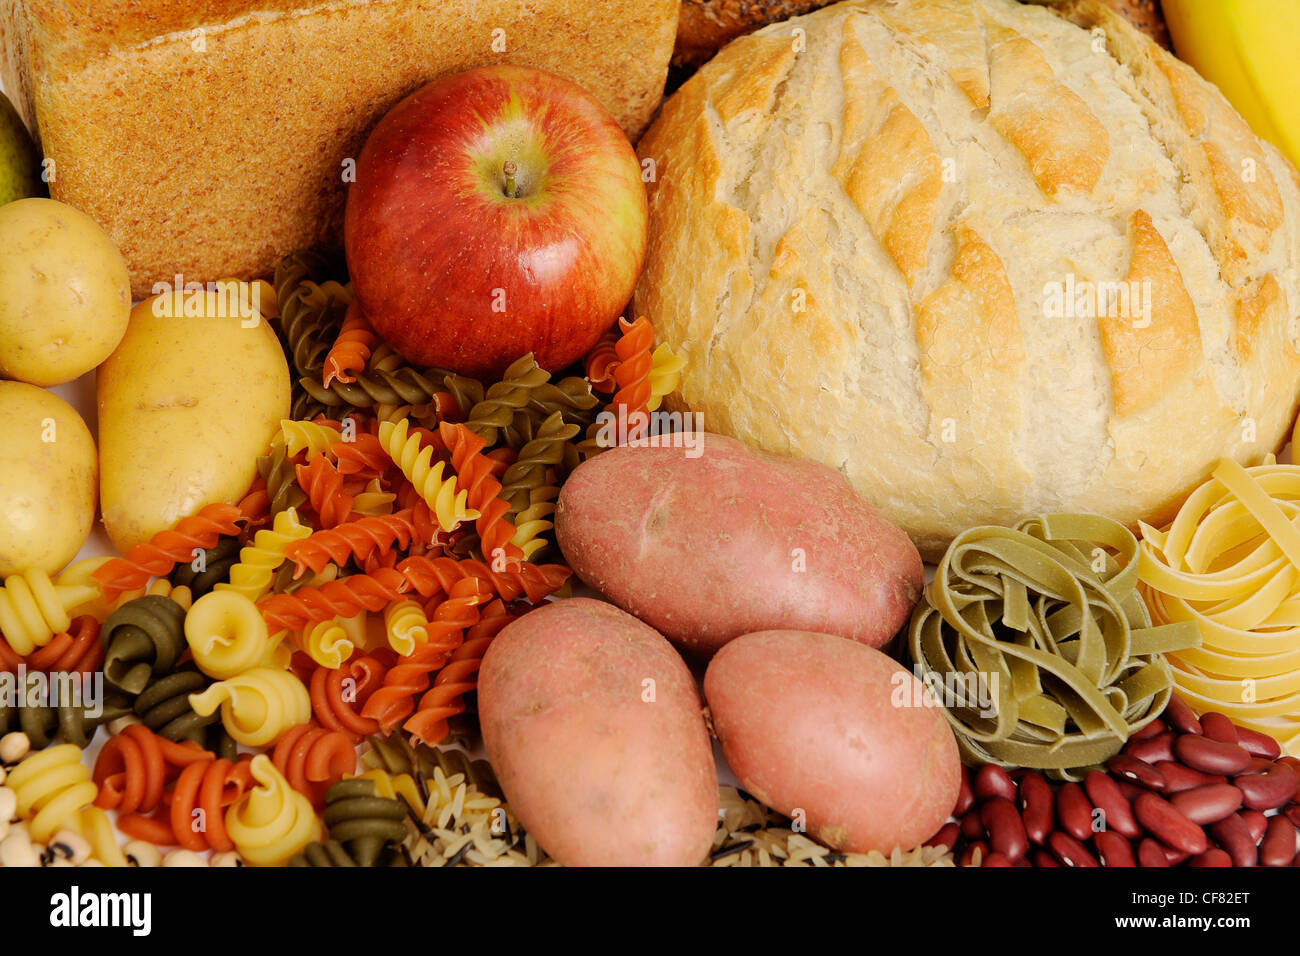 Carbohydrates and fruit still life Stock Photo